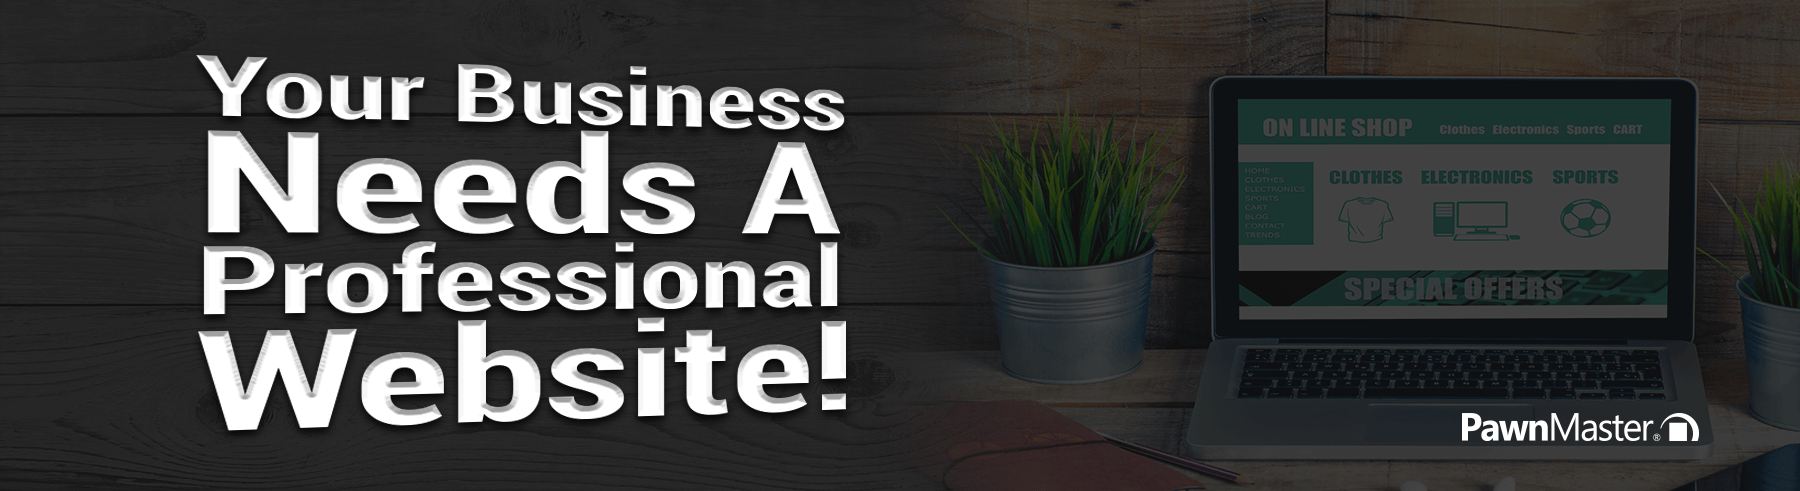 Your Business Needs A Professional Website